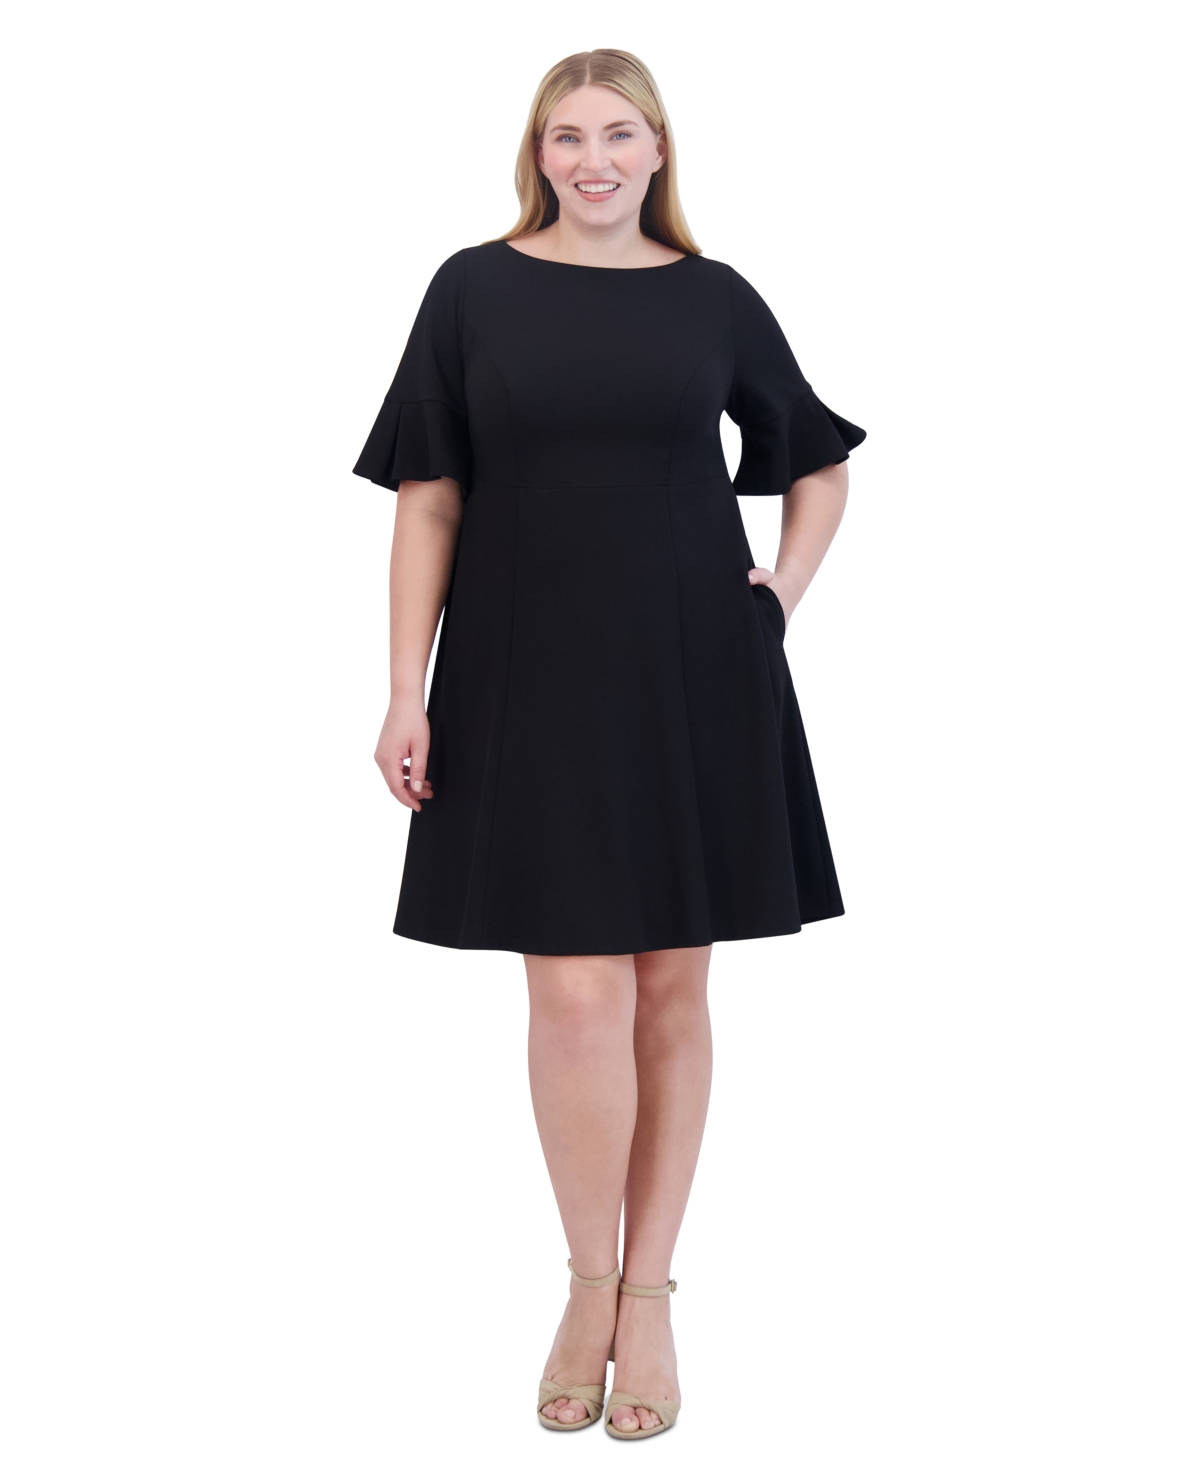 Plus Size Elbow-Sleeve Fit & Flare Dress - Black